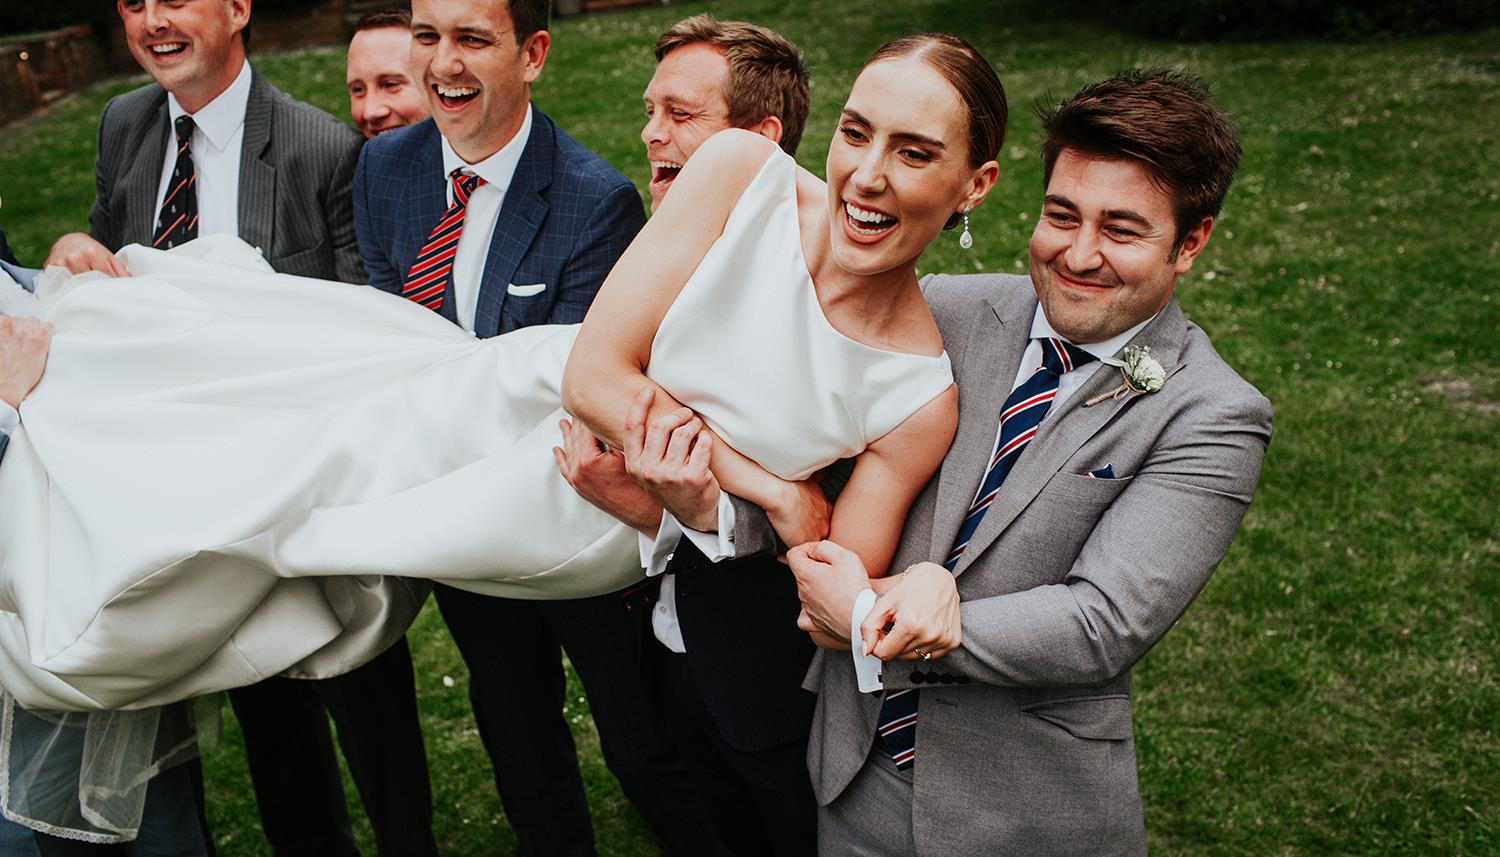 Carrying the bride. Photo Credit: Oxana Mazur Photography